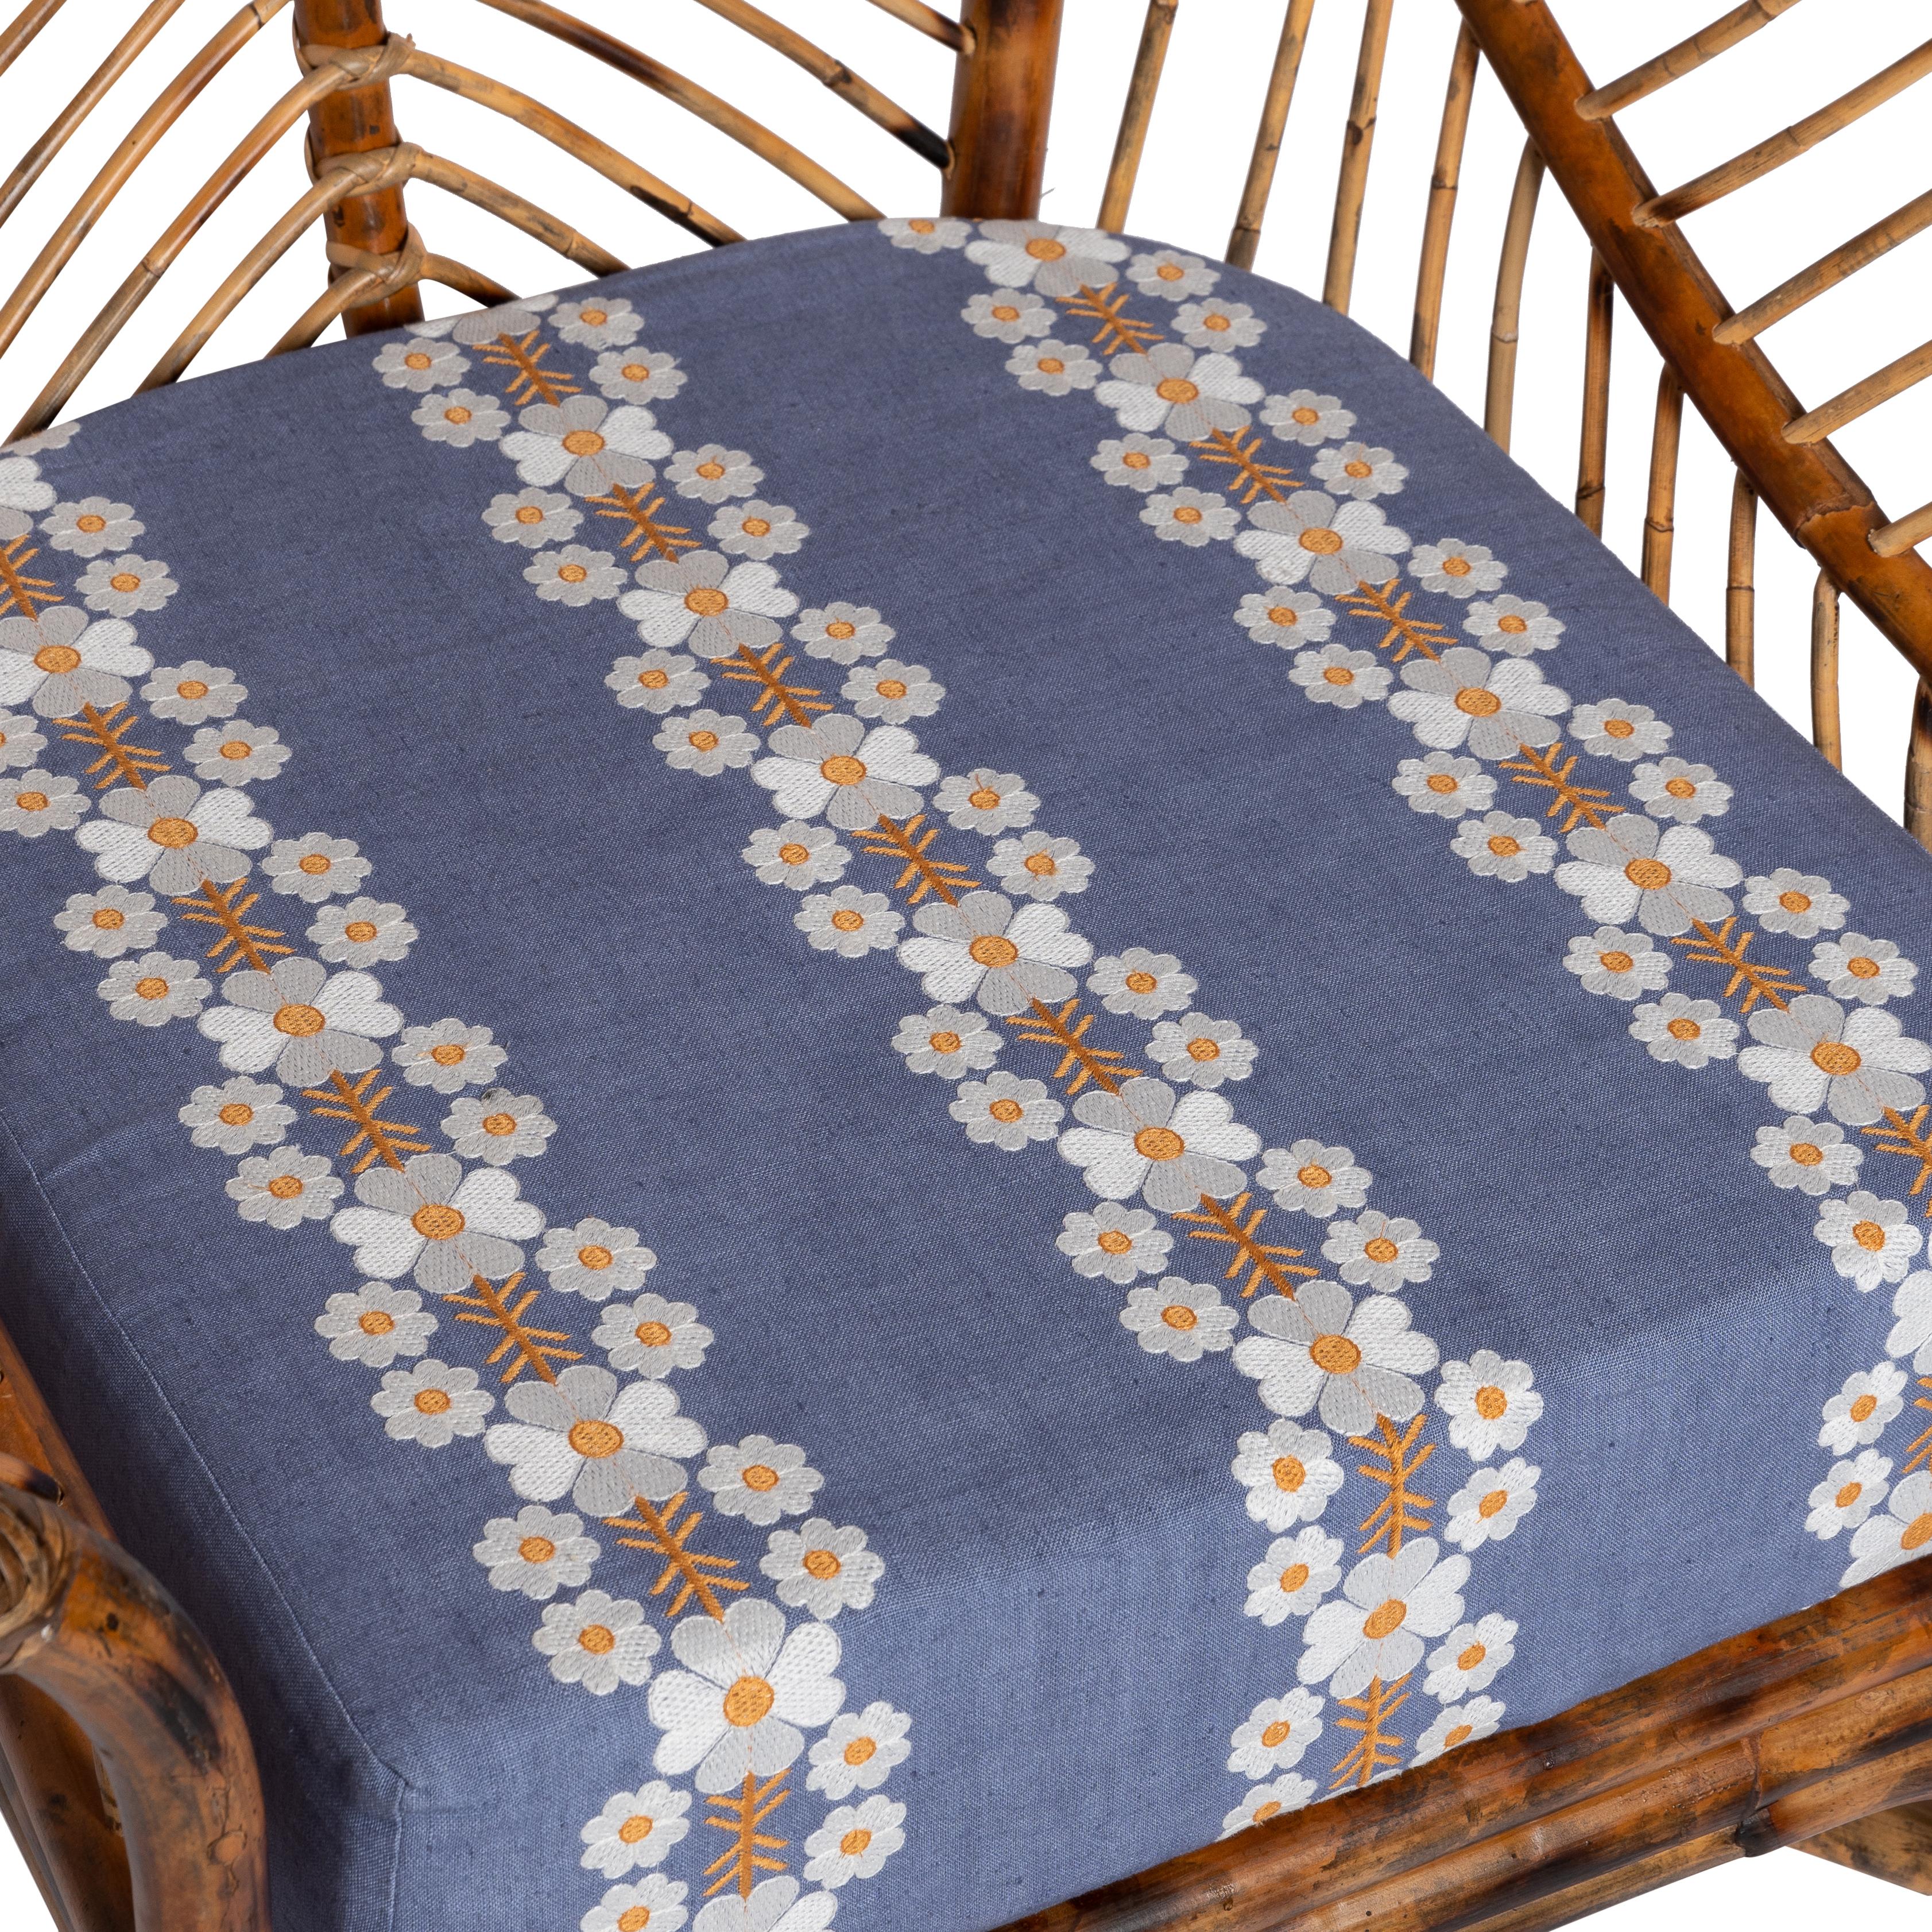 Indonesian Bamboo Chair in Natural Rattan, blue cushion, Modern by Sharland England